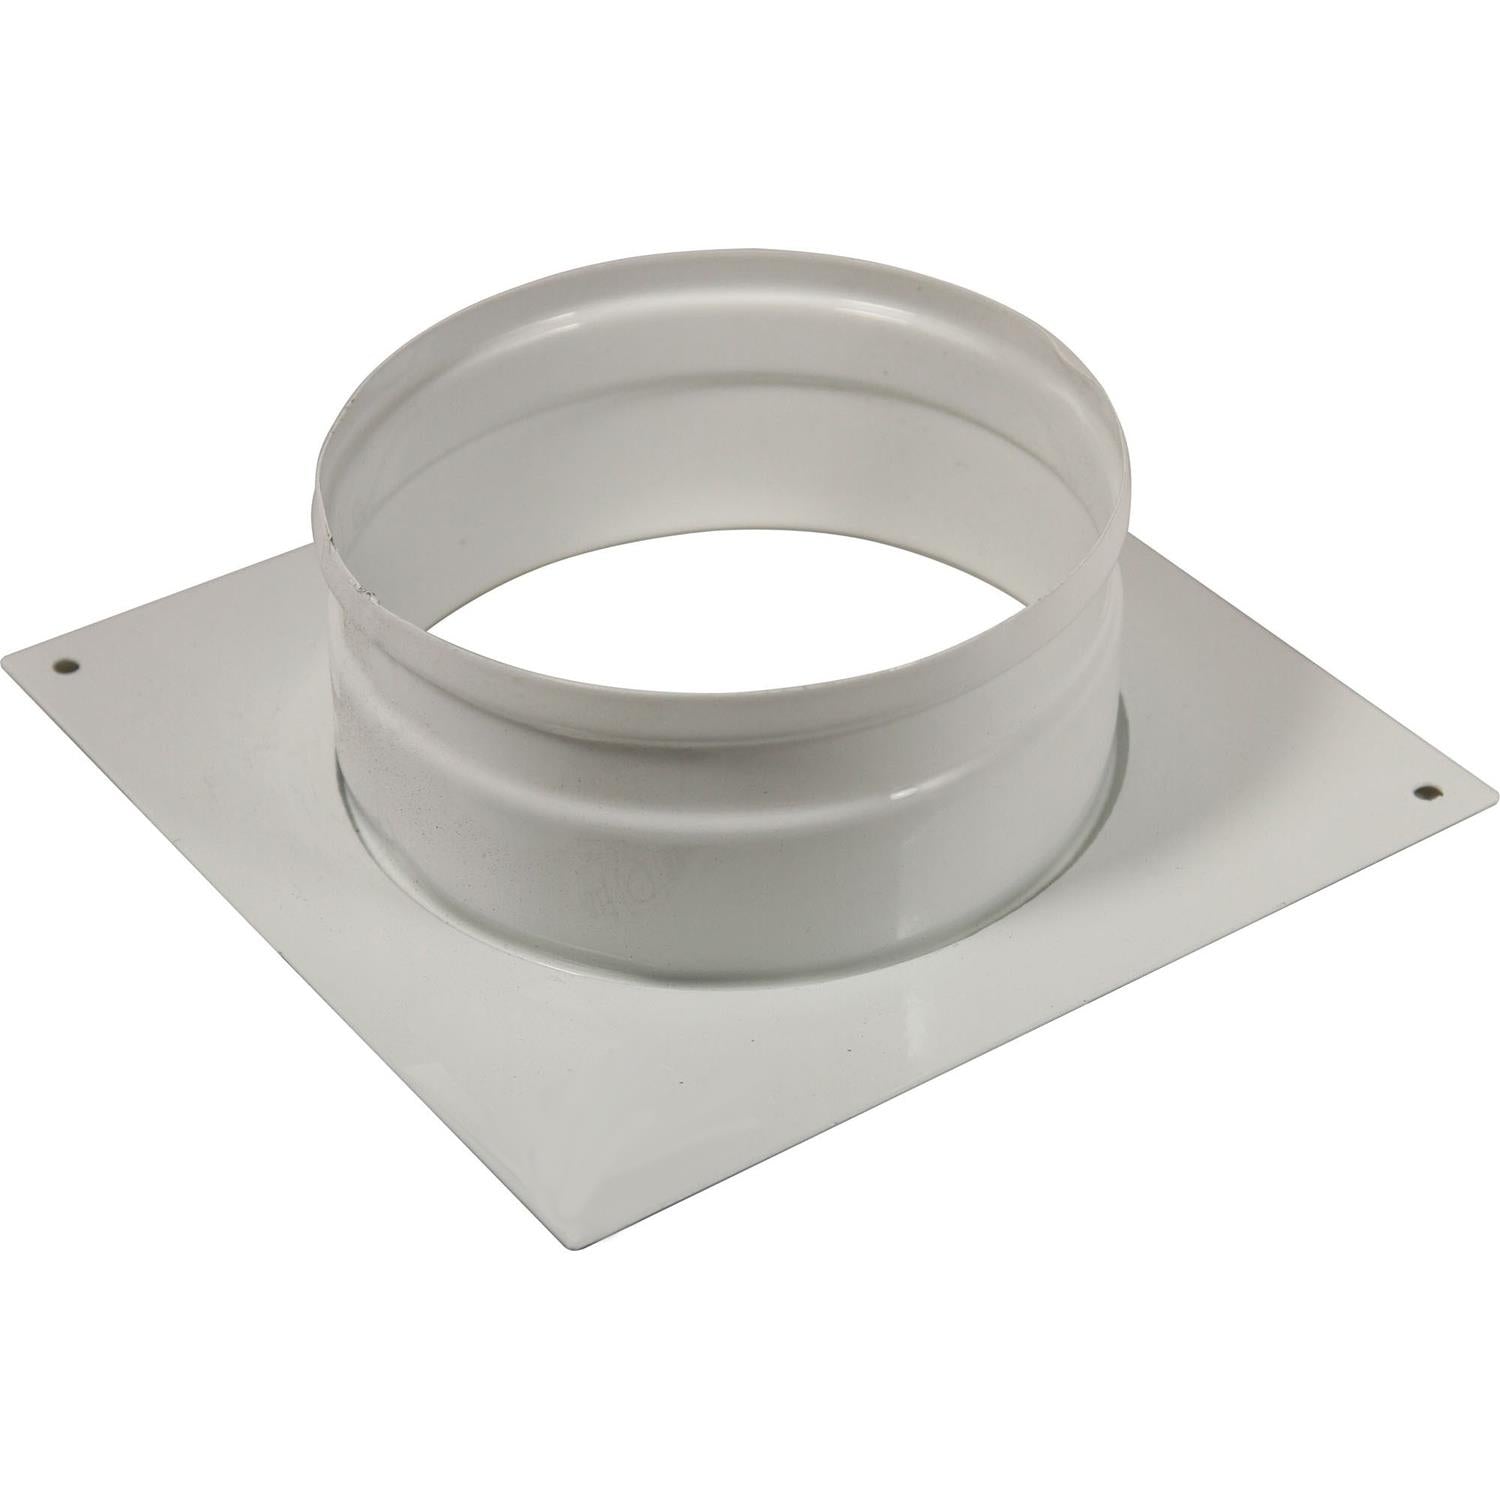 Ducting Square Wall Plates